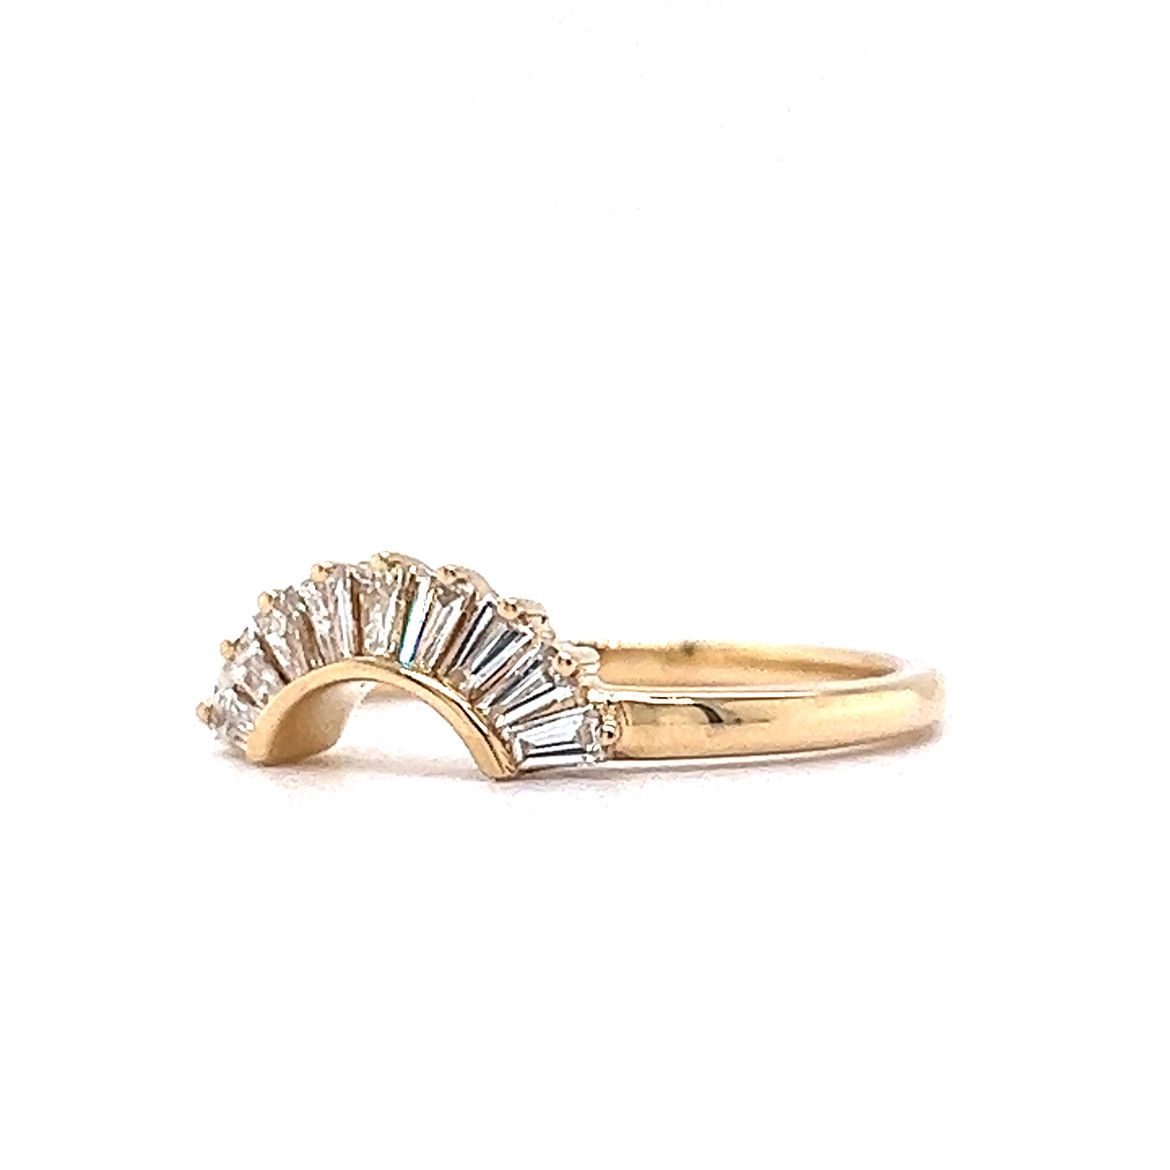 .27 Curved Baguette Diamond Wedding Band in 14k Yellow GoldComposition: 14 Karat Yellow Gold Ring Size: 7 Total Diamond Weight: .27ct Total Gram Weight: 2.5 g Inscription: 14k
      